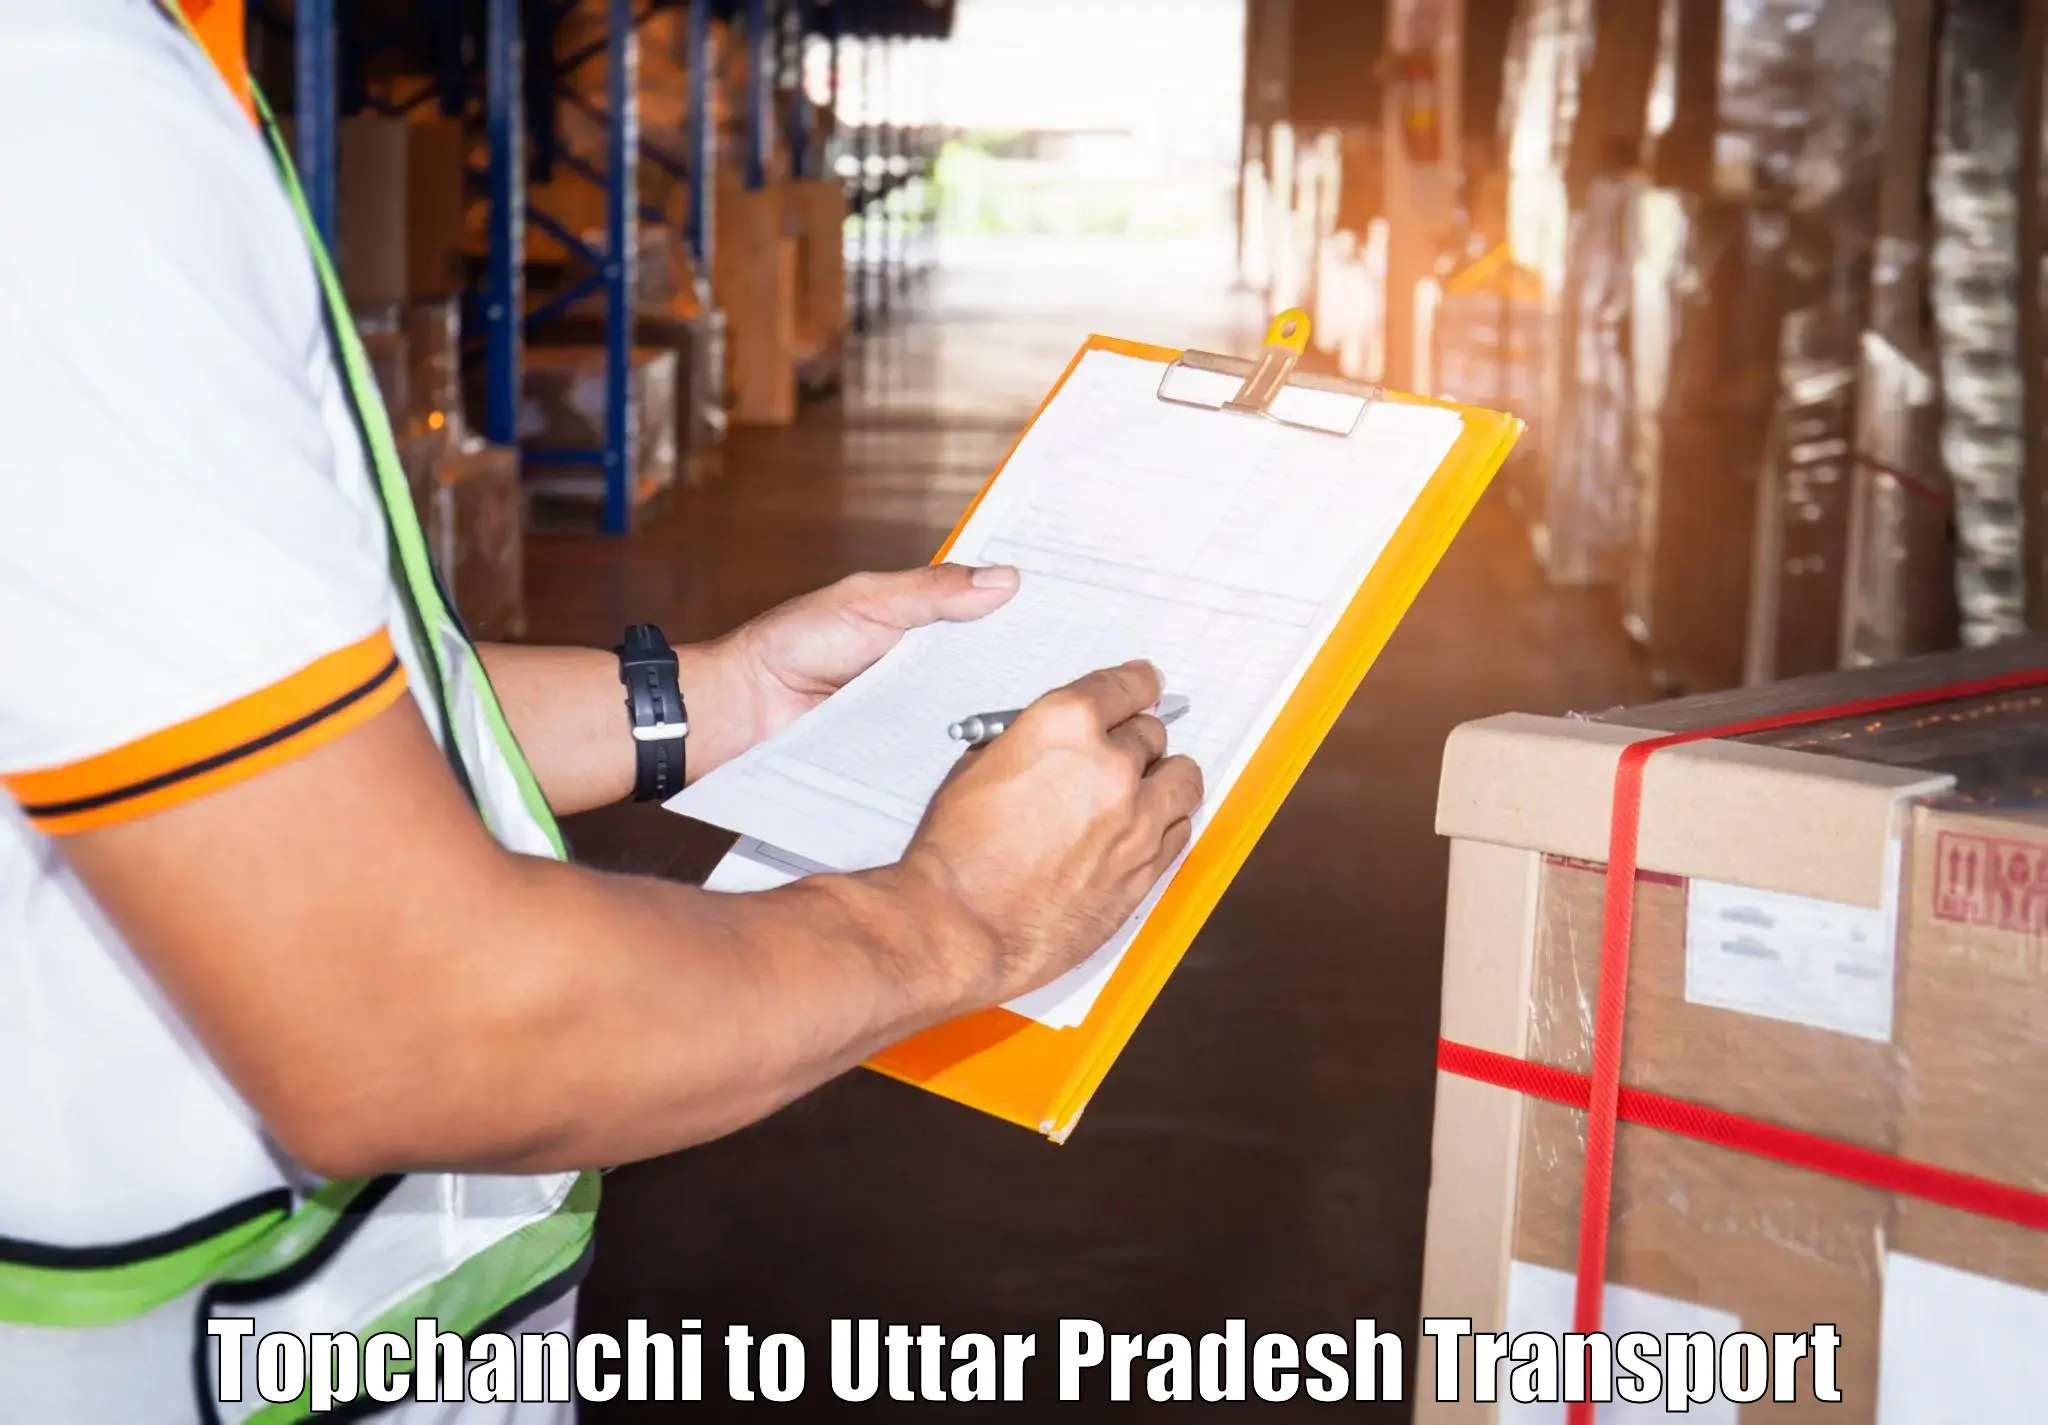 Commercial transport service Topchanchi to Saharanpur